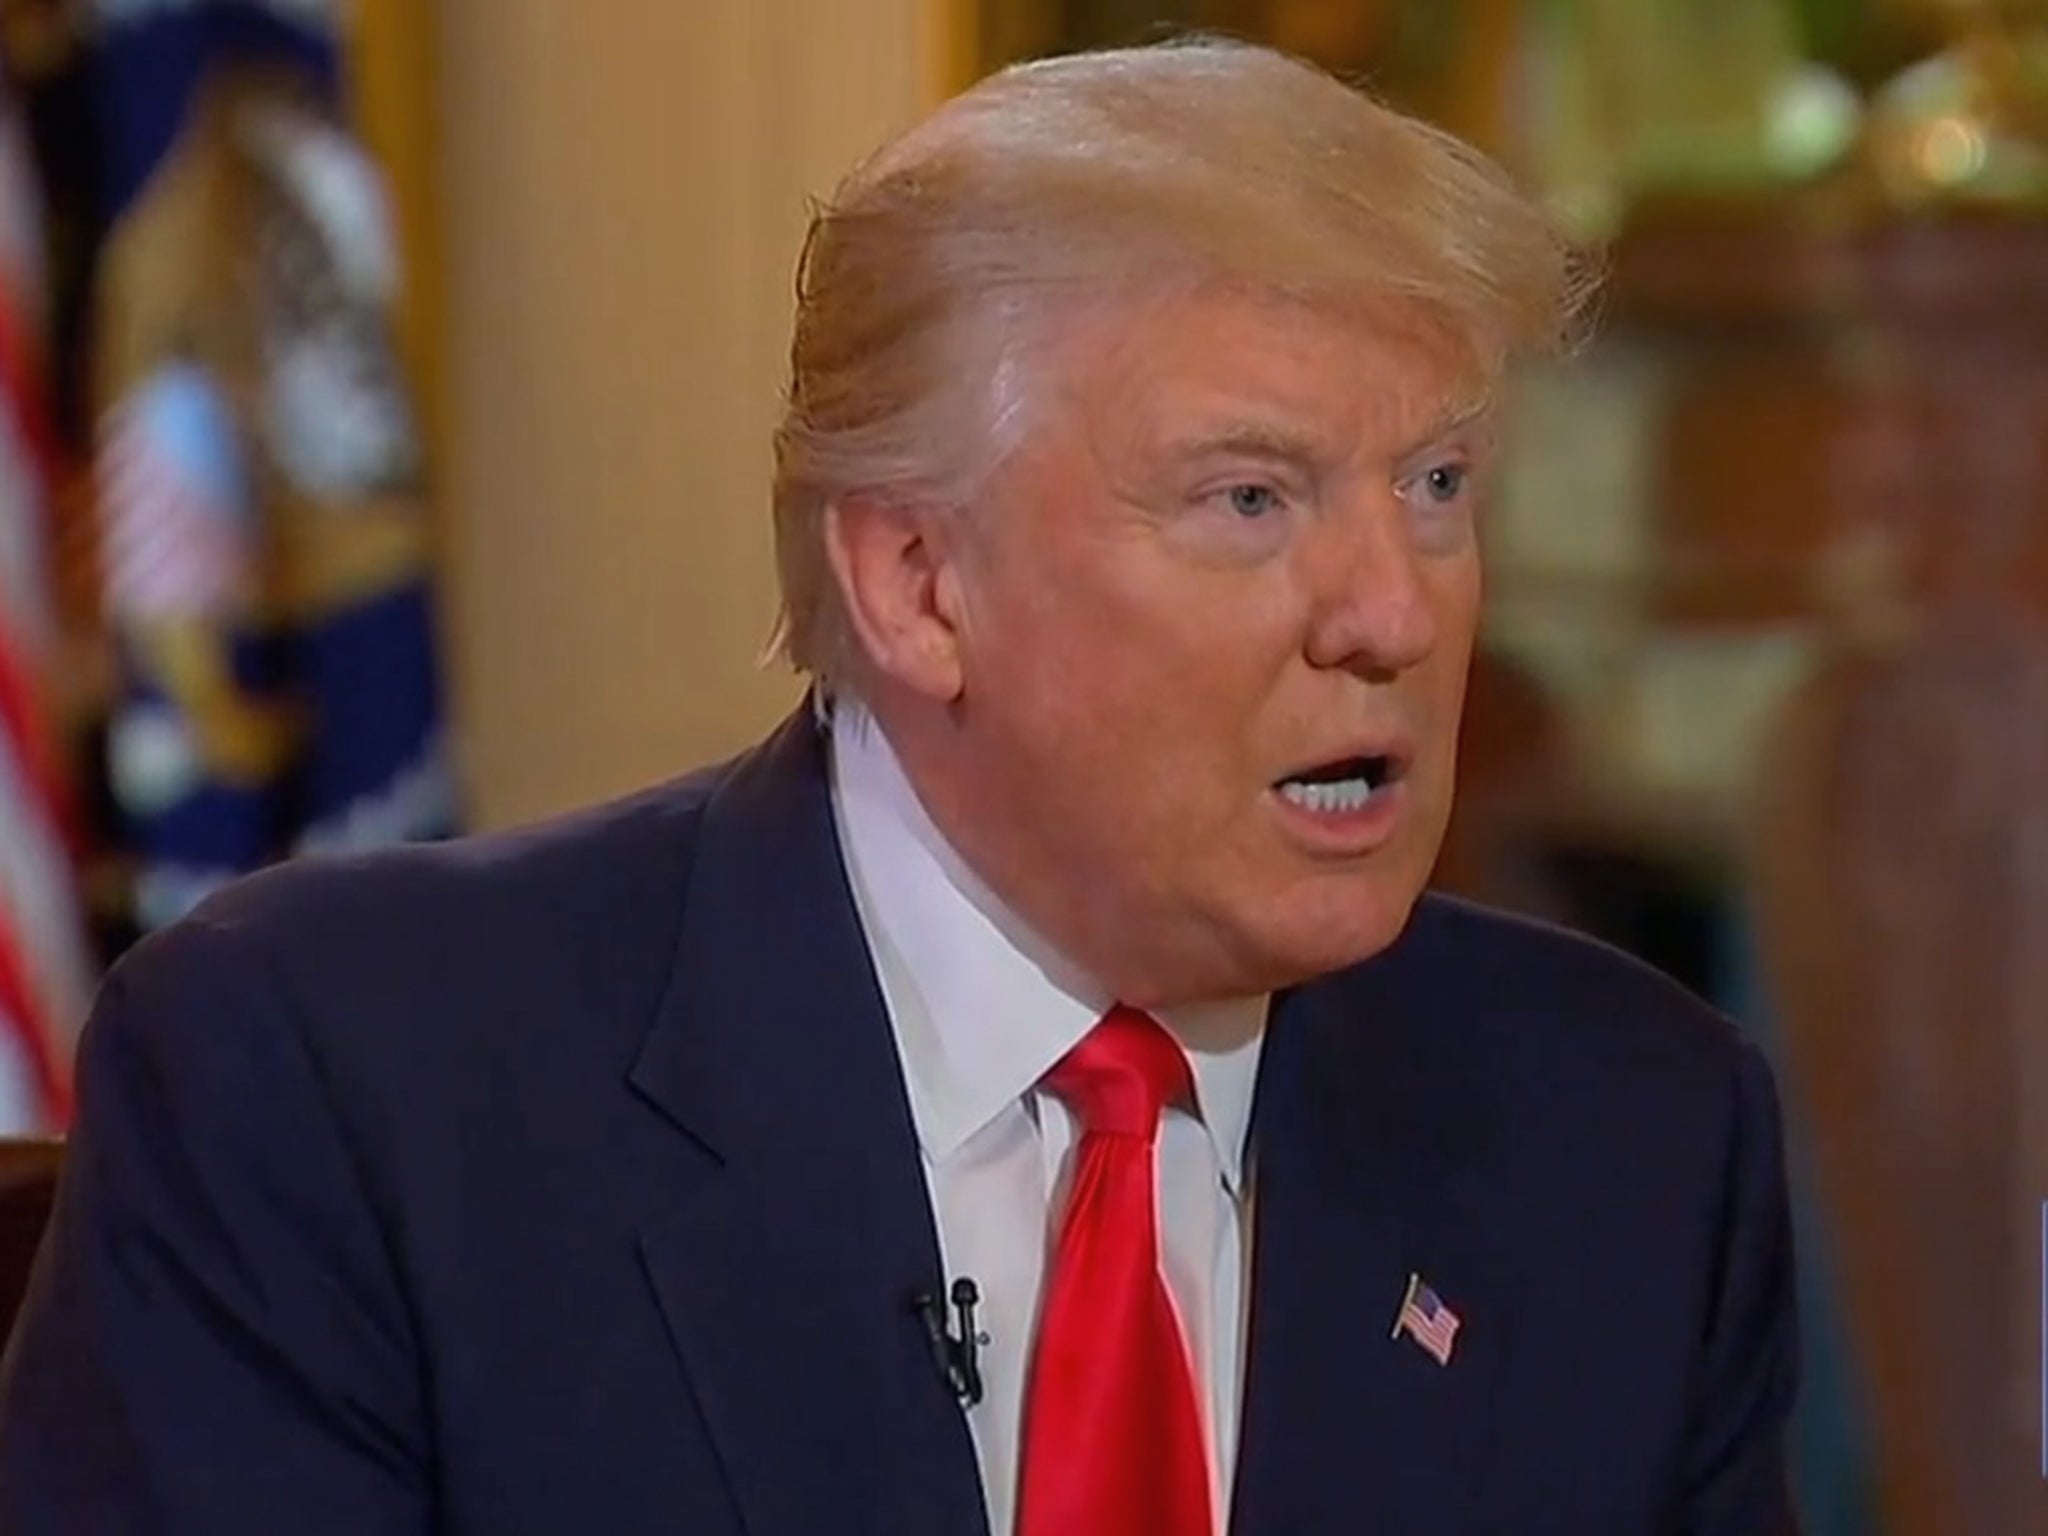 Trump told Fox that a ‘revved-up’ economy would help pay for the increase